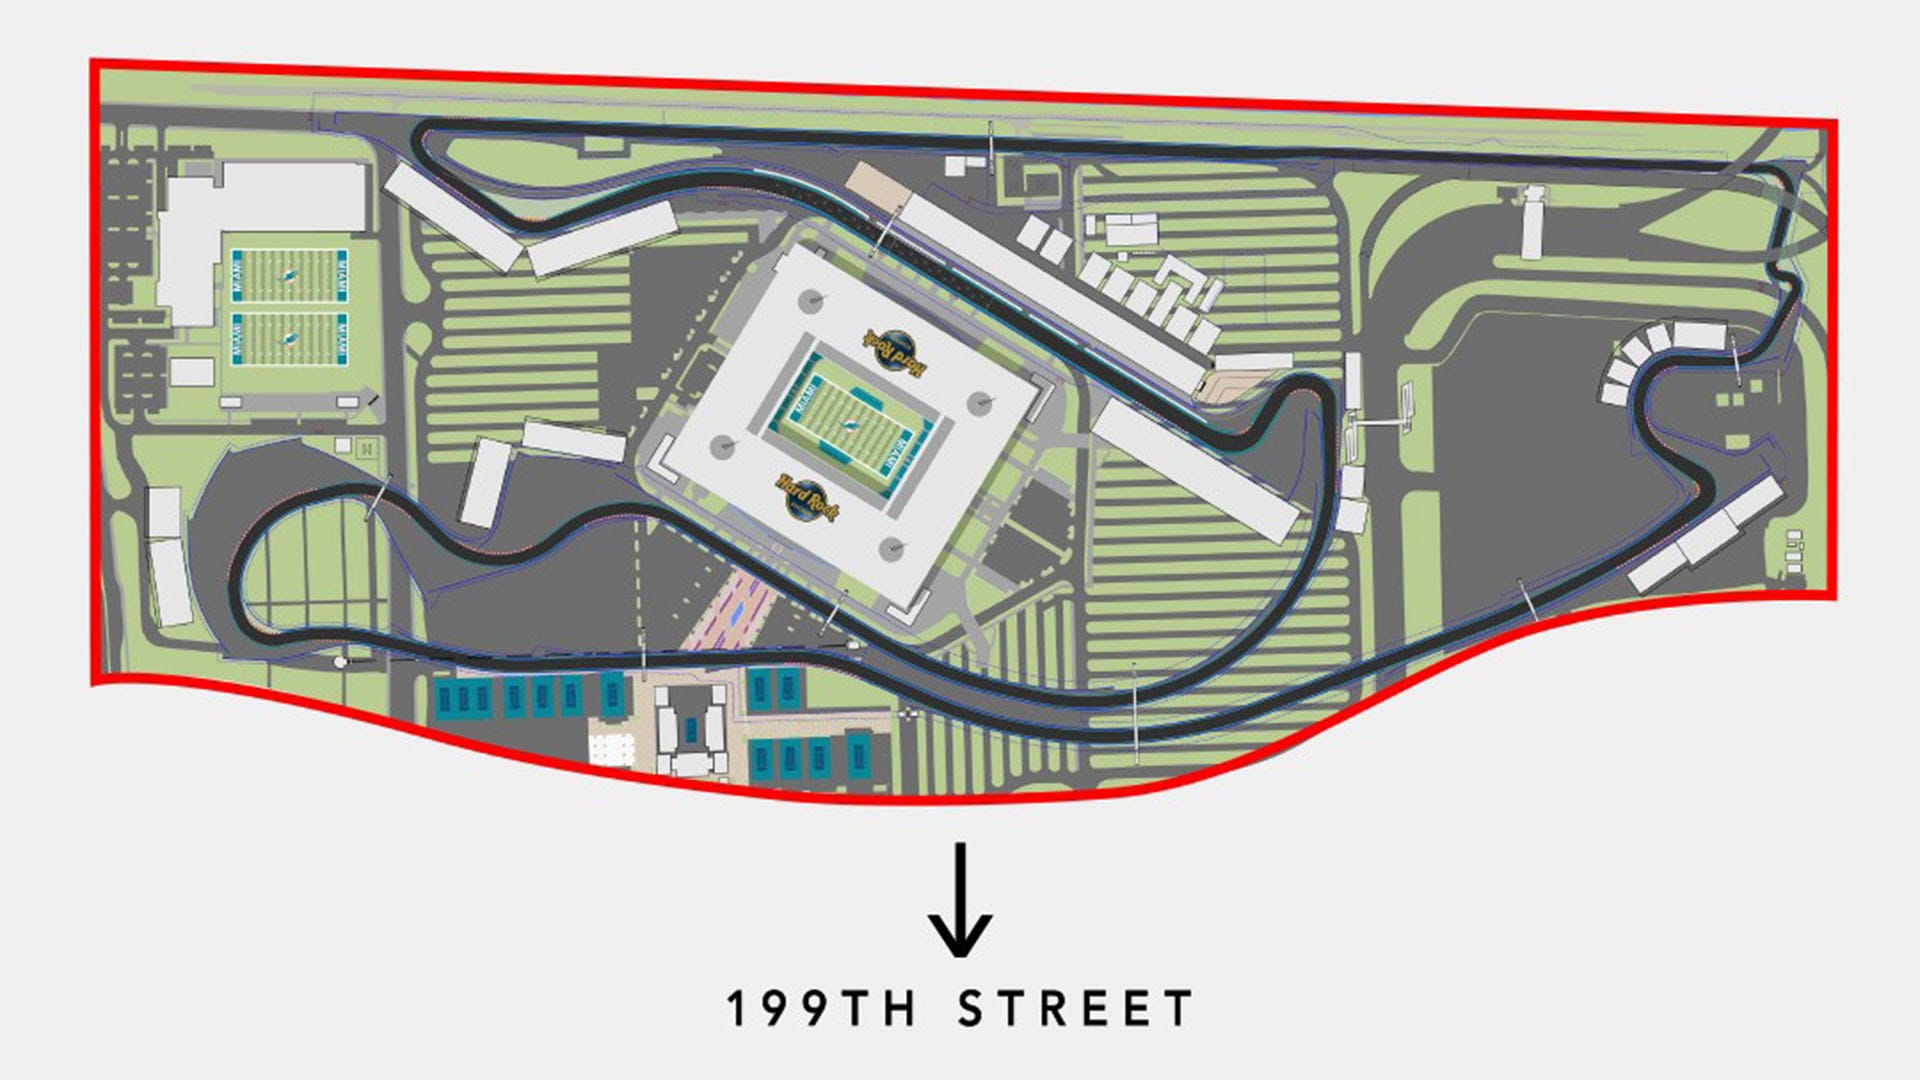 Changes made to proposed Miami Grand Prix track layout | Formula 1®